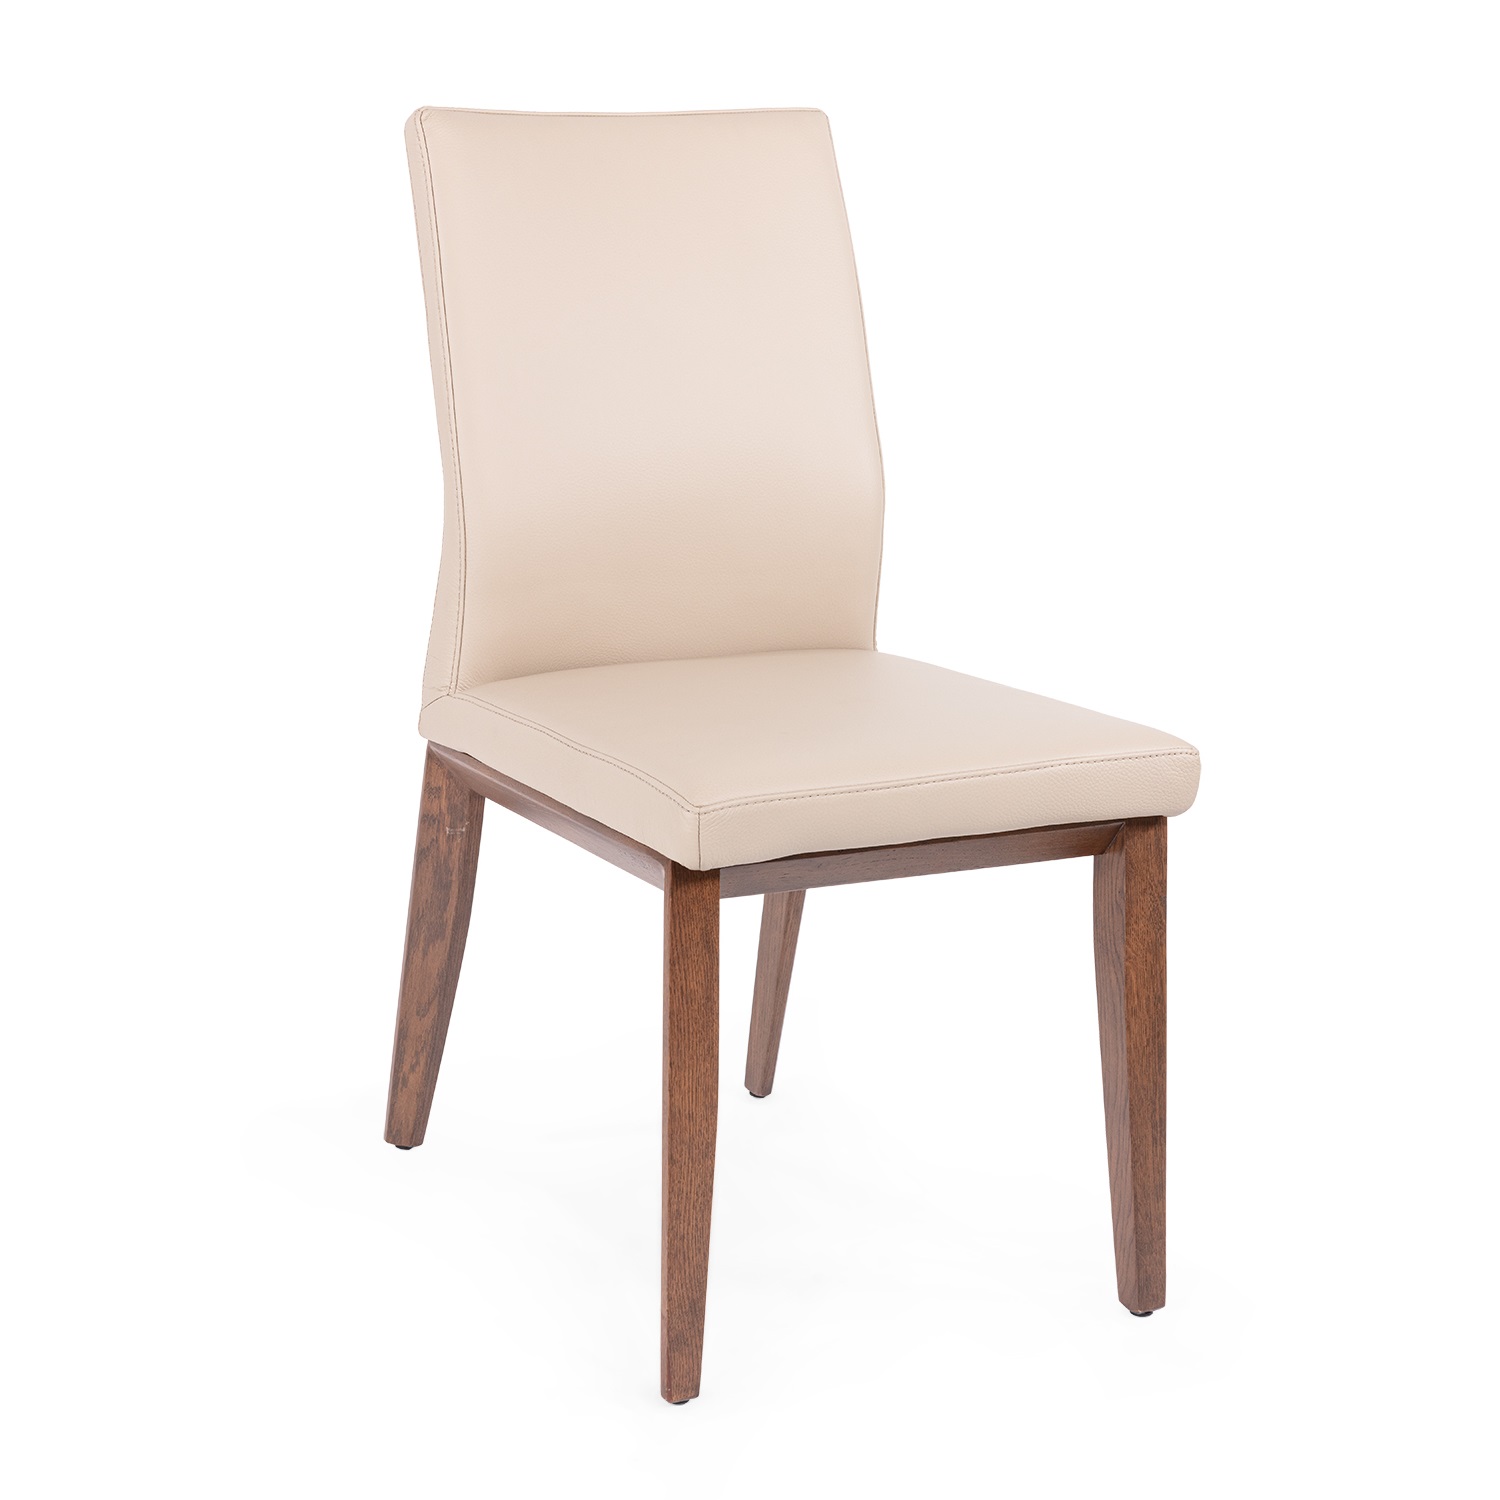 AALBORG dining chair